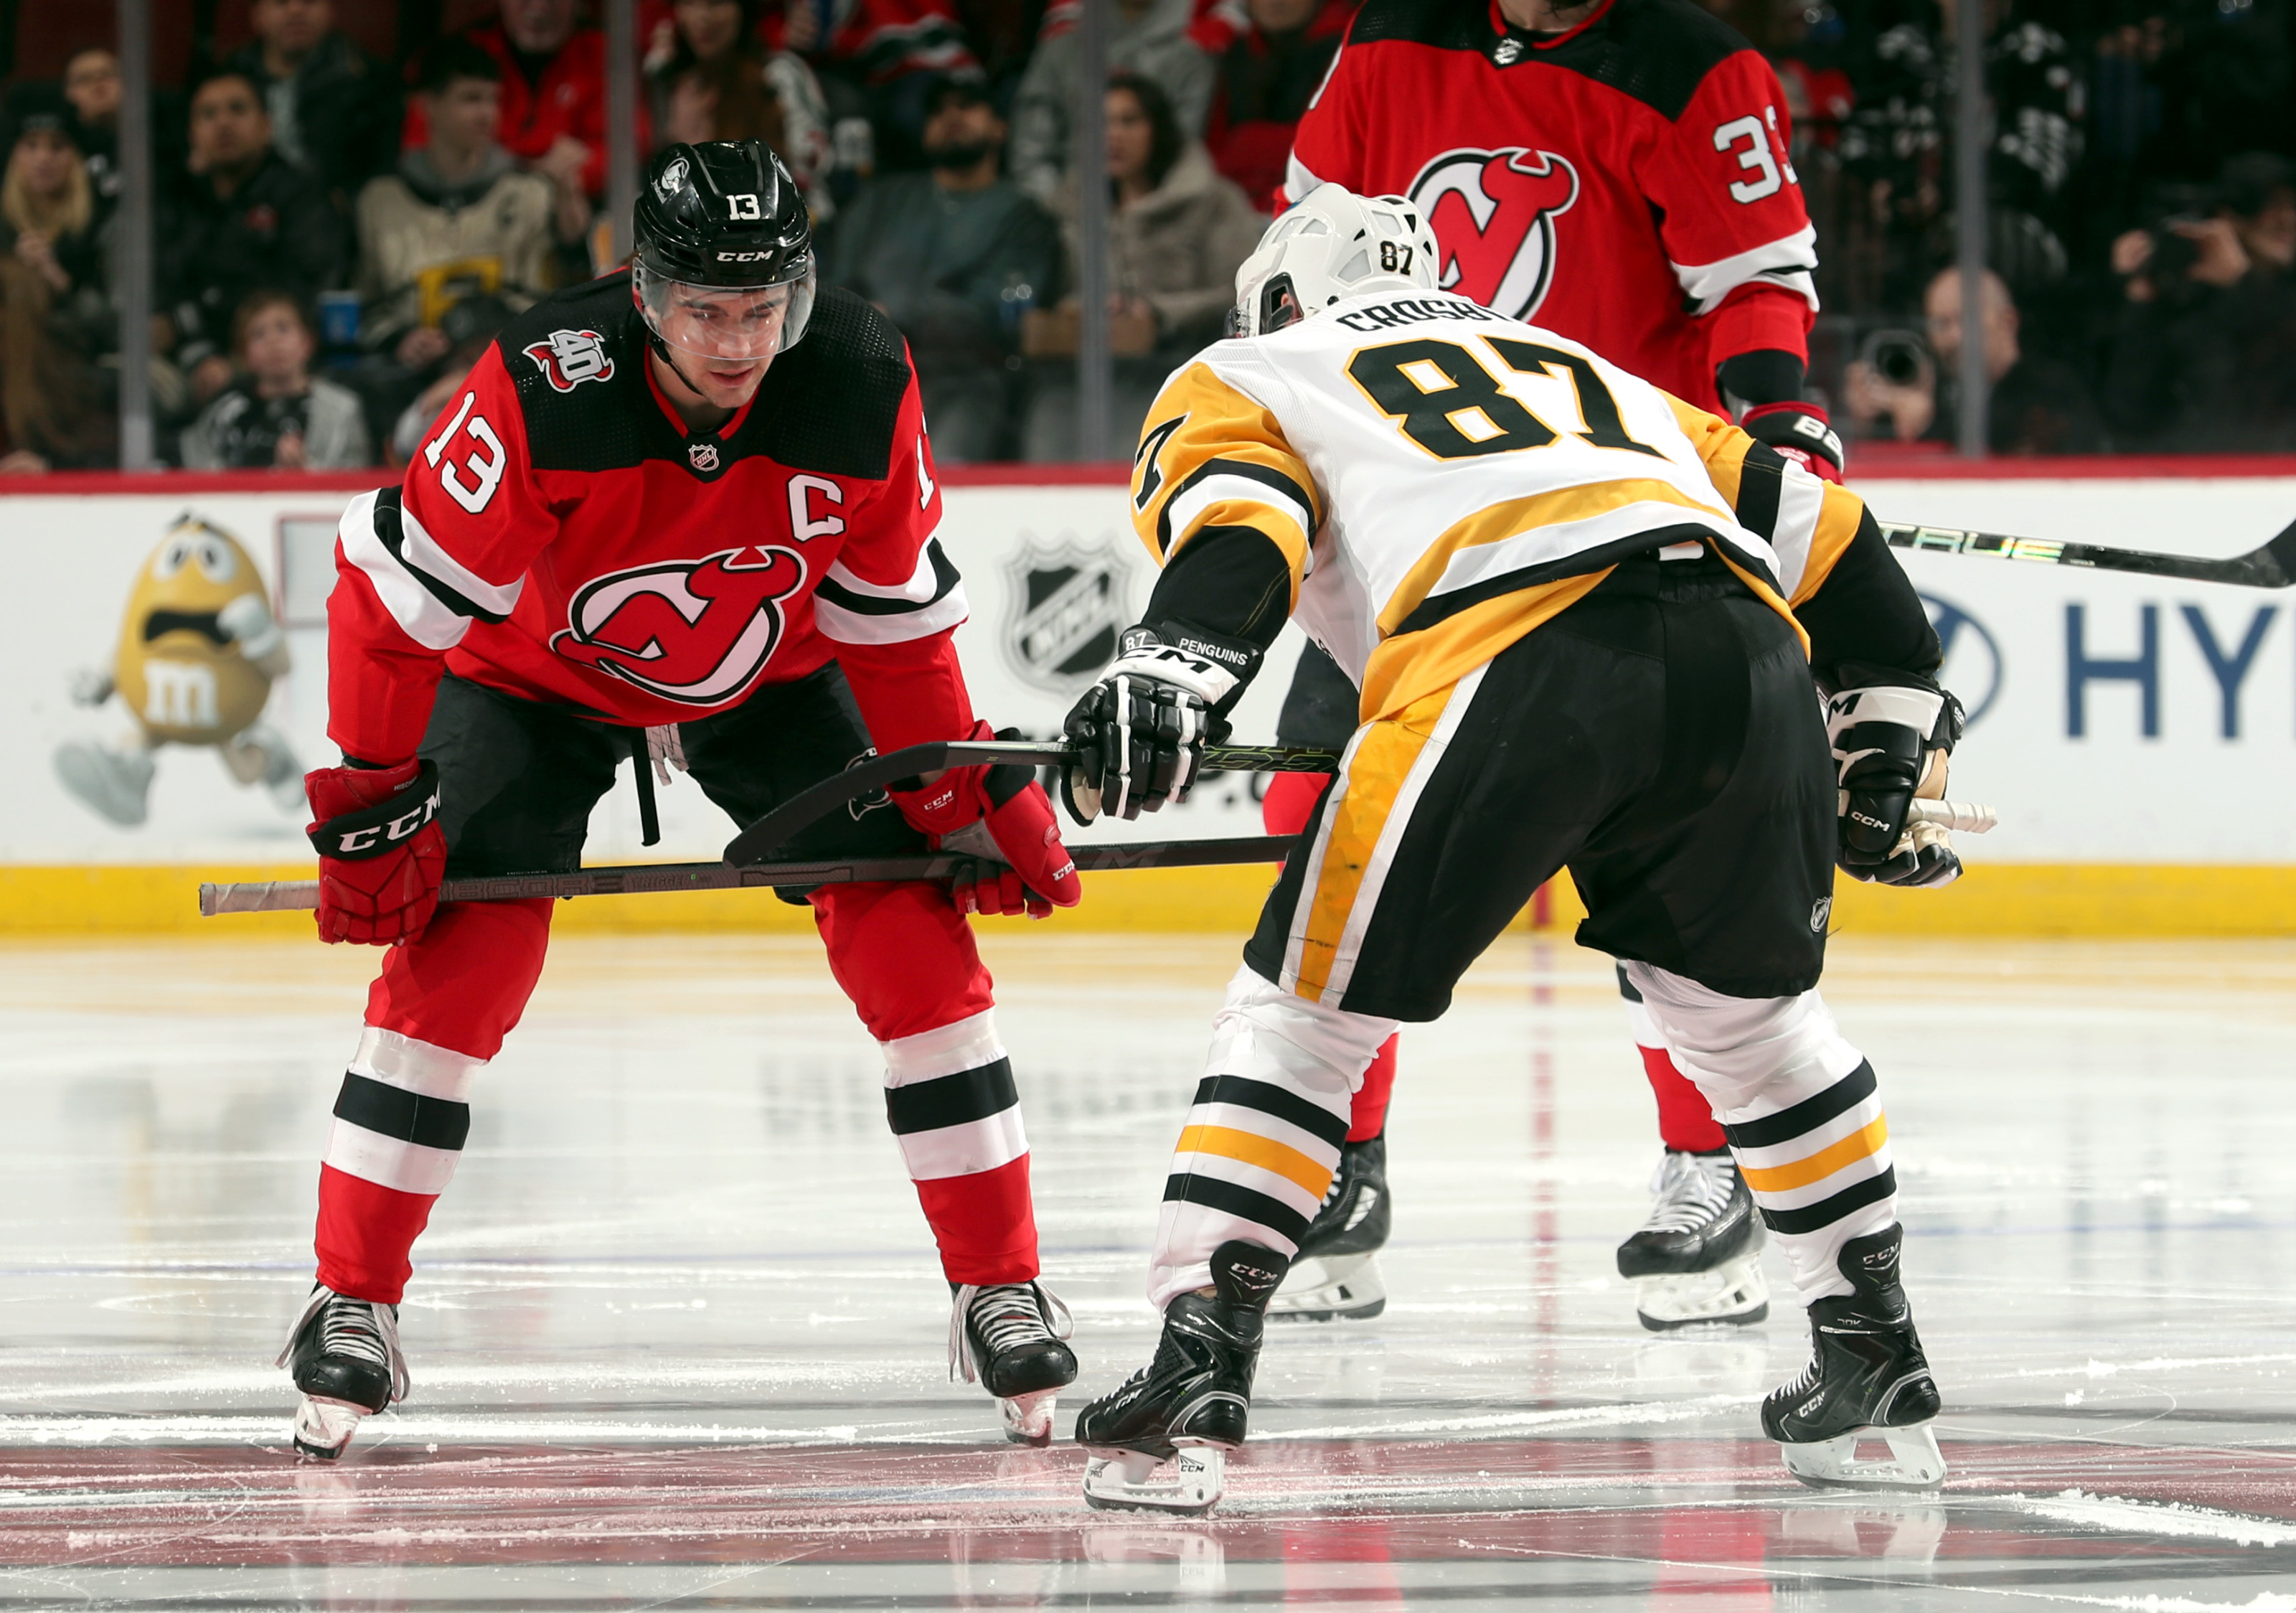 Game Preview #13: New Jersey Devils vs. Boston Bruins - All About